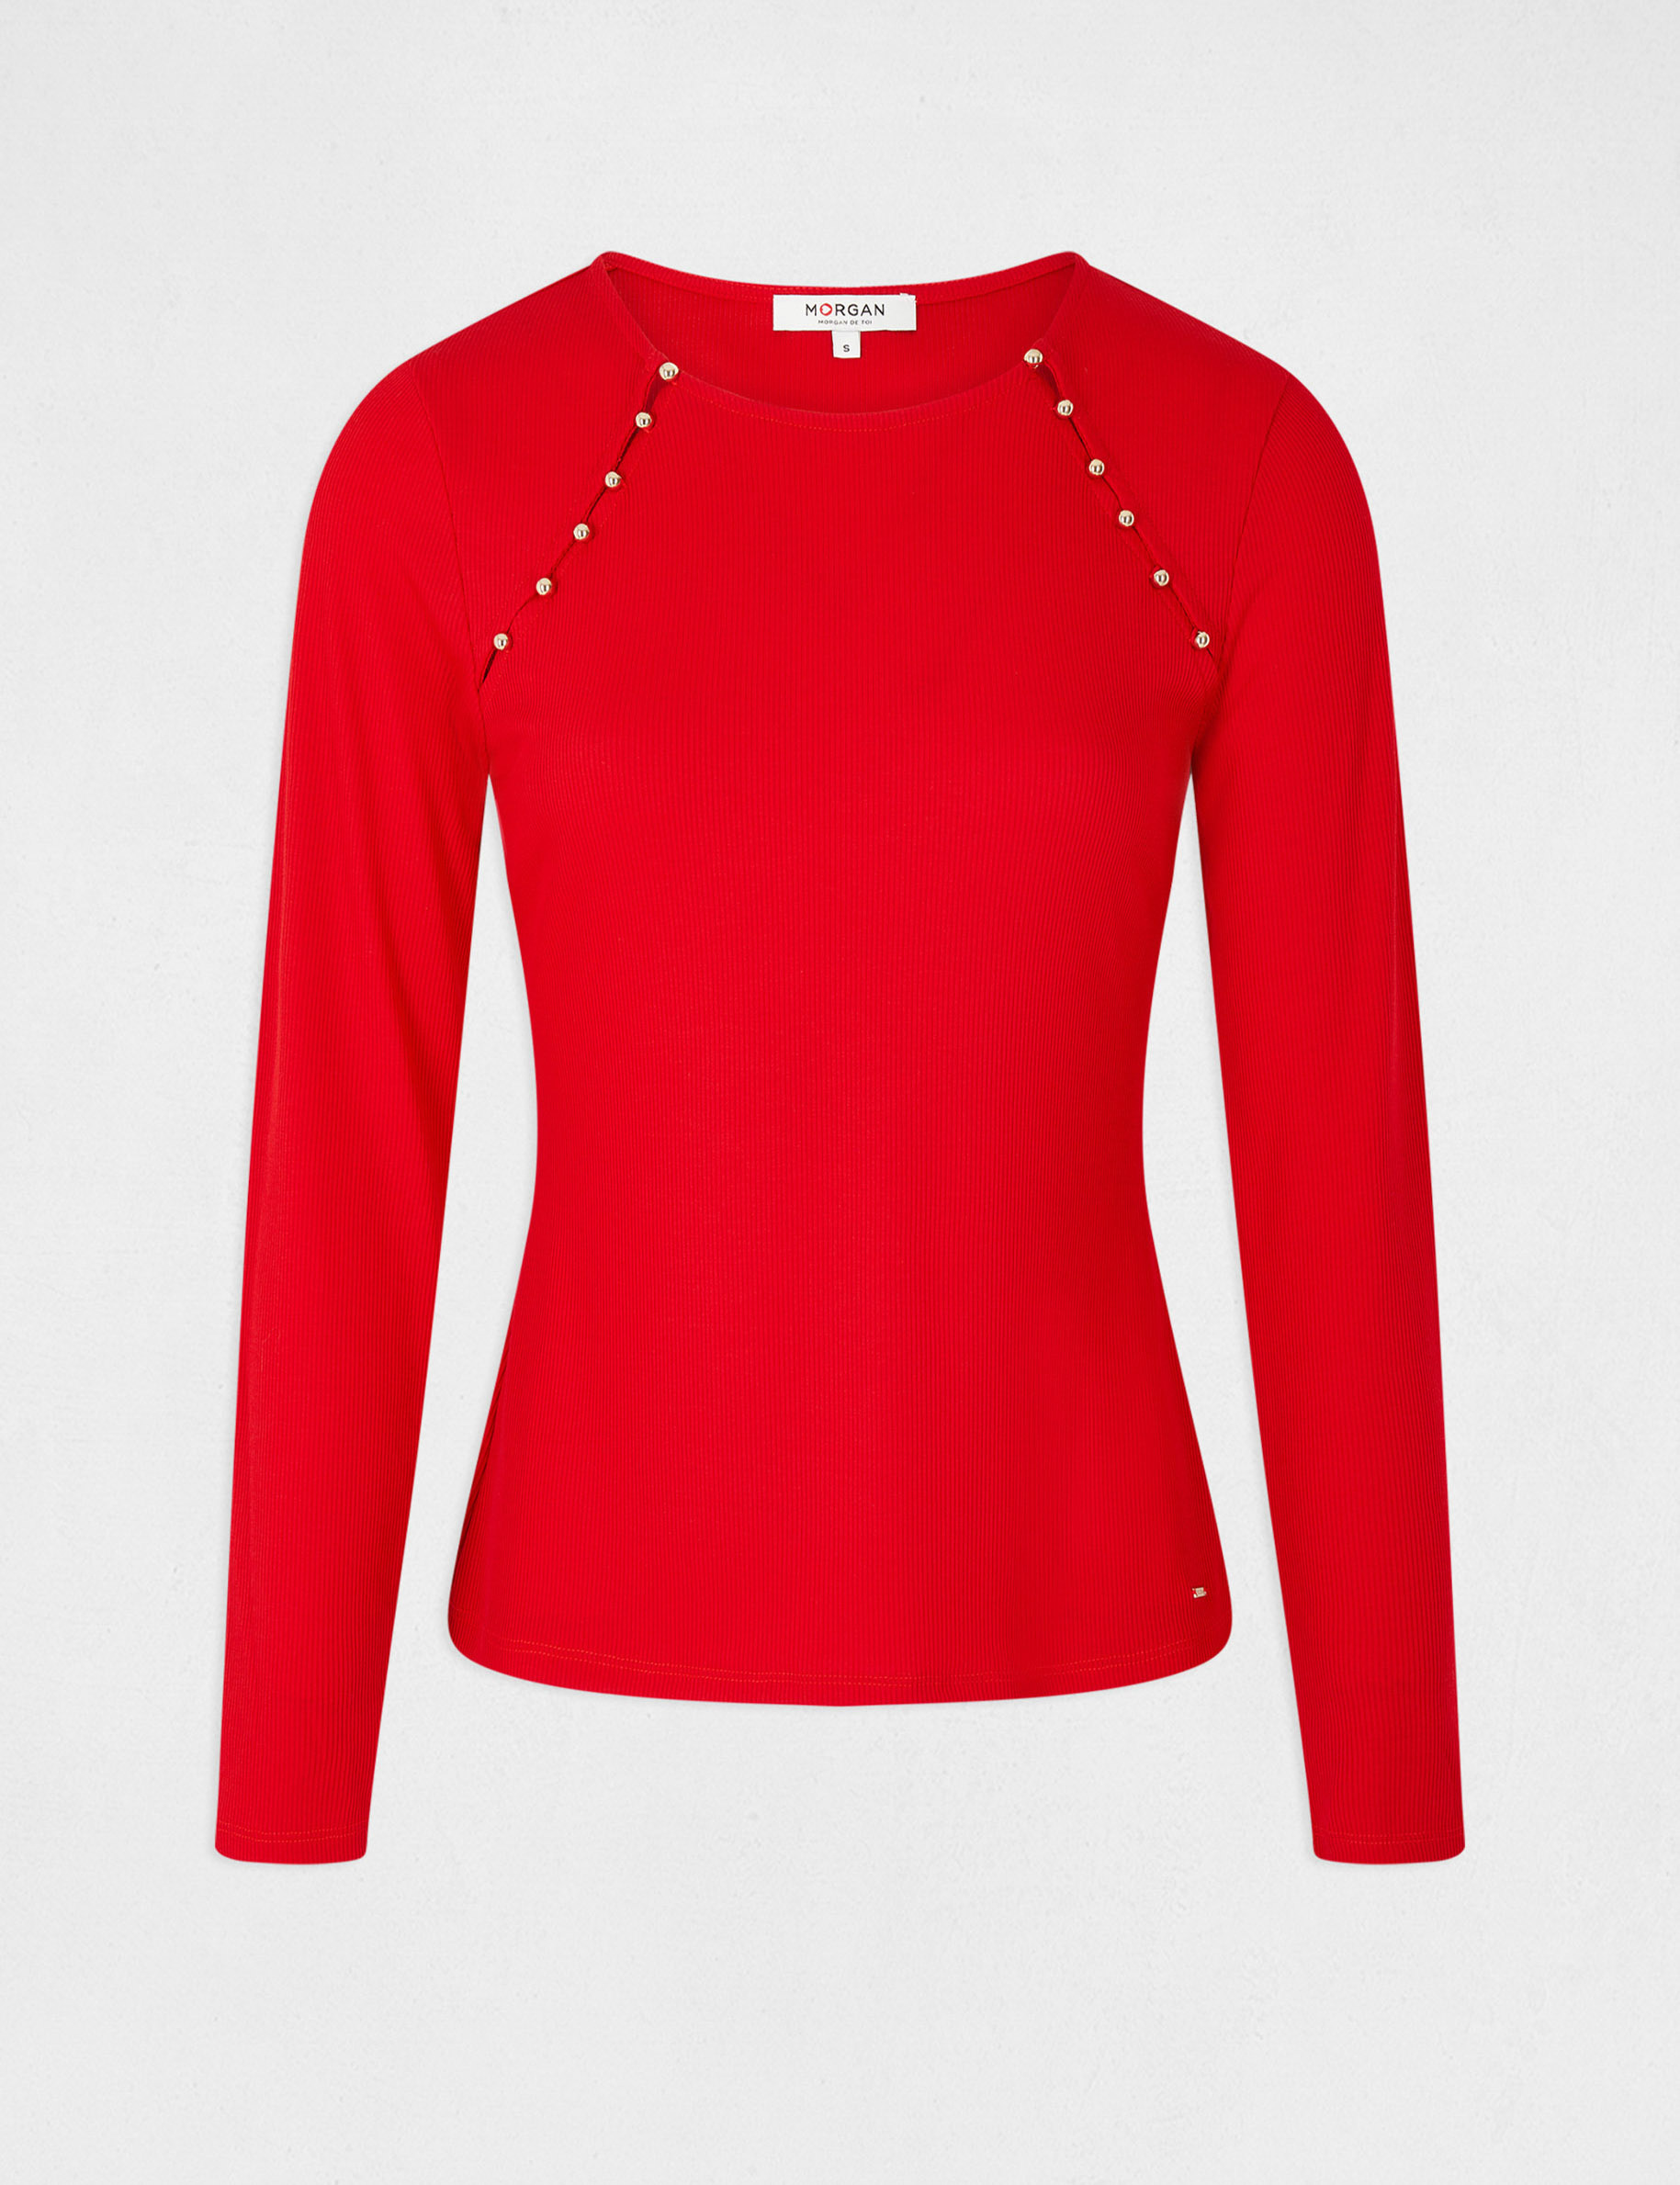 Ribbed long-sleeved t-shirt red ladies'